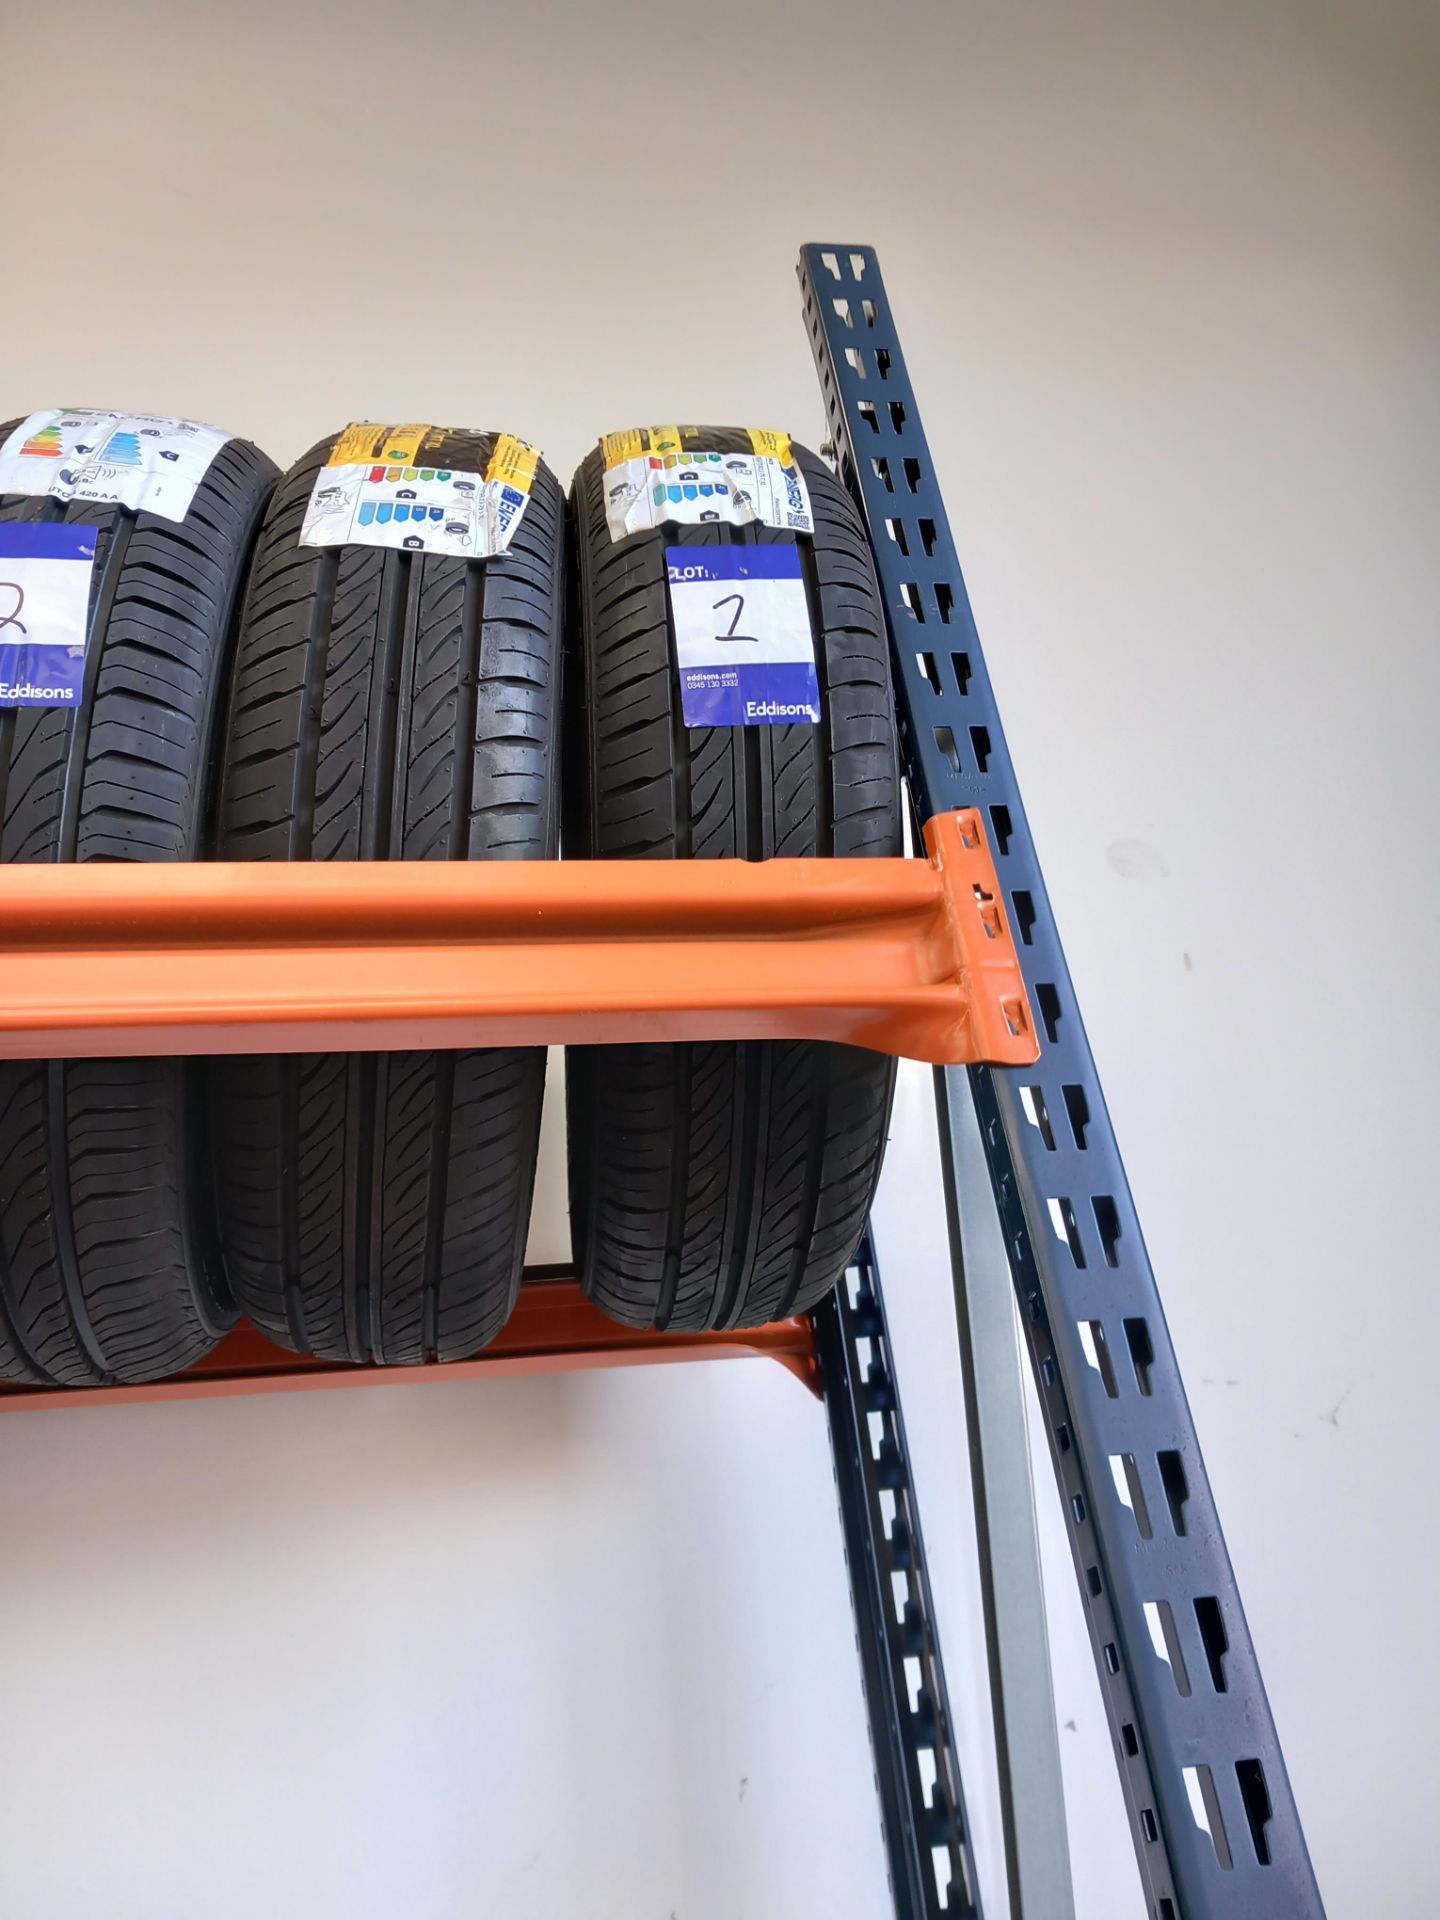 2 x Pace PC50 155/70 13 Tyres - This is a Composite lot made up of Lots 1 - 96 inclusive. At the end